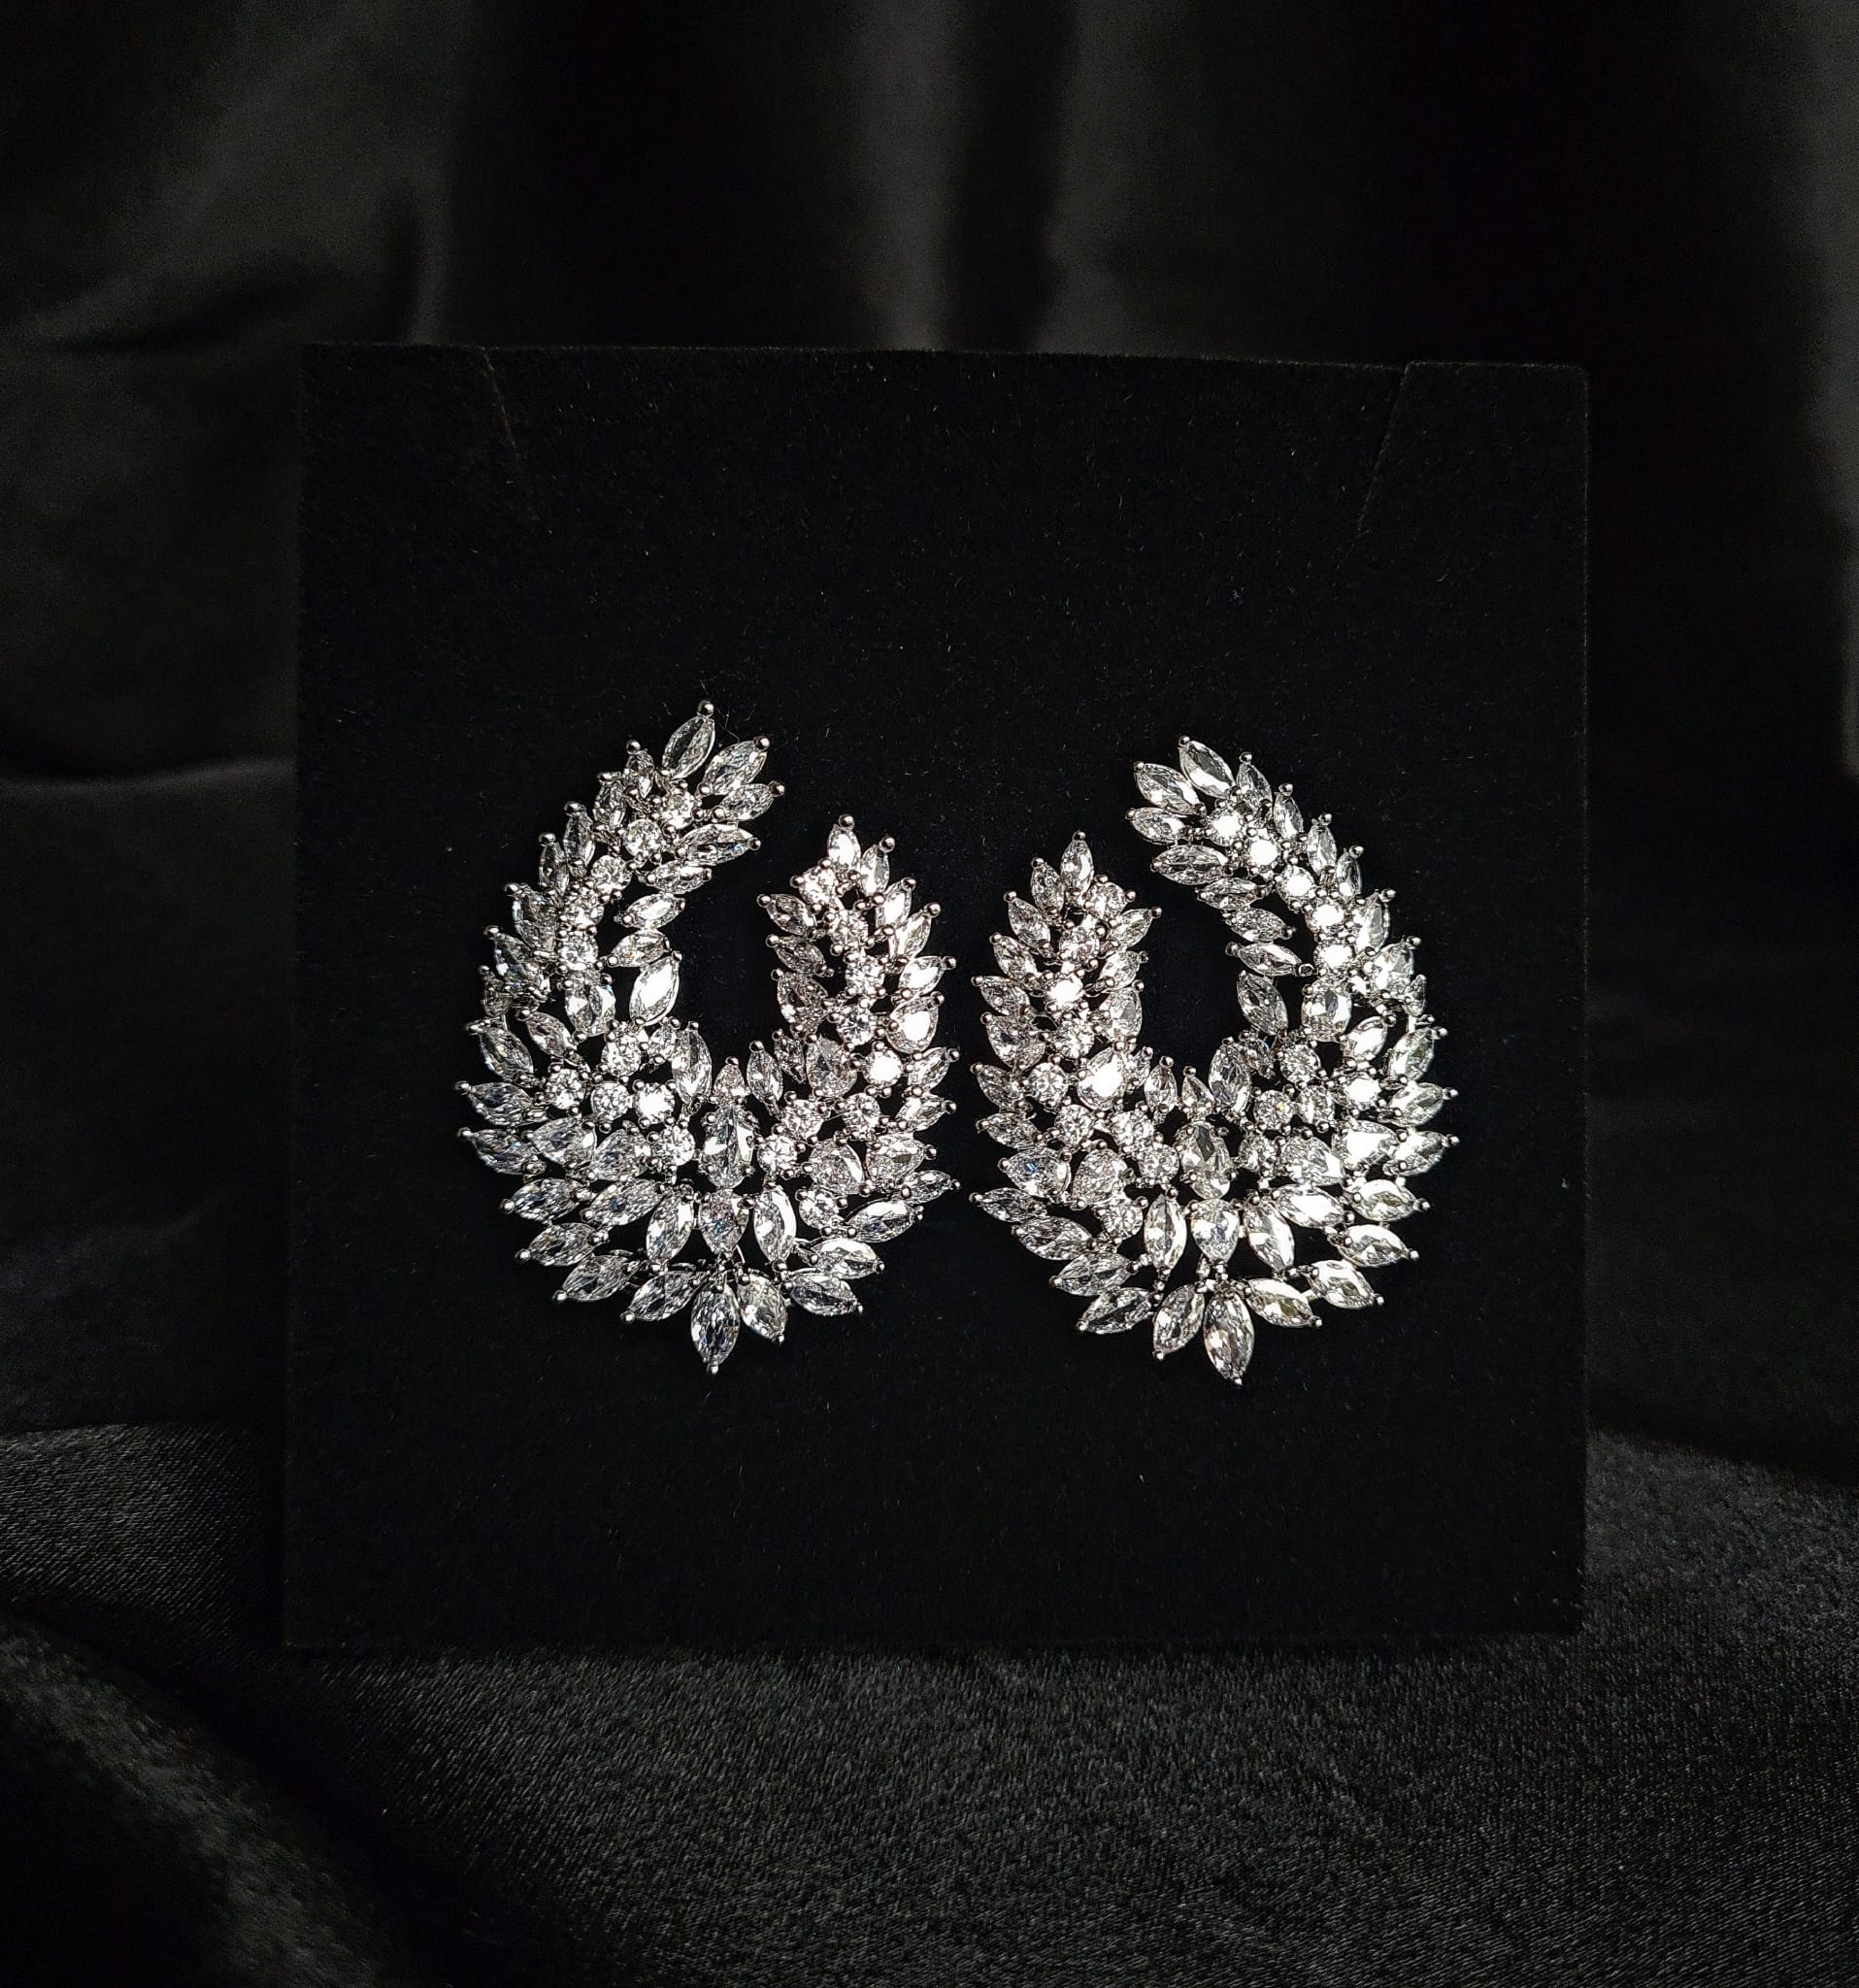 Clair Stud Earrings featuring cubic zirconia stones arranged in a captivating waterdrop shape